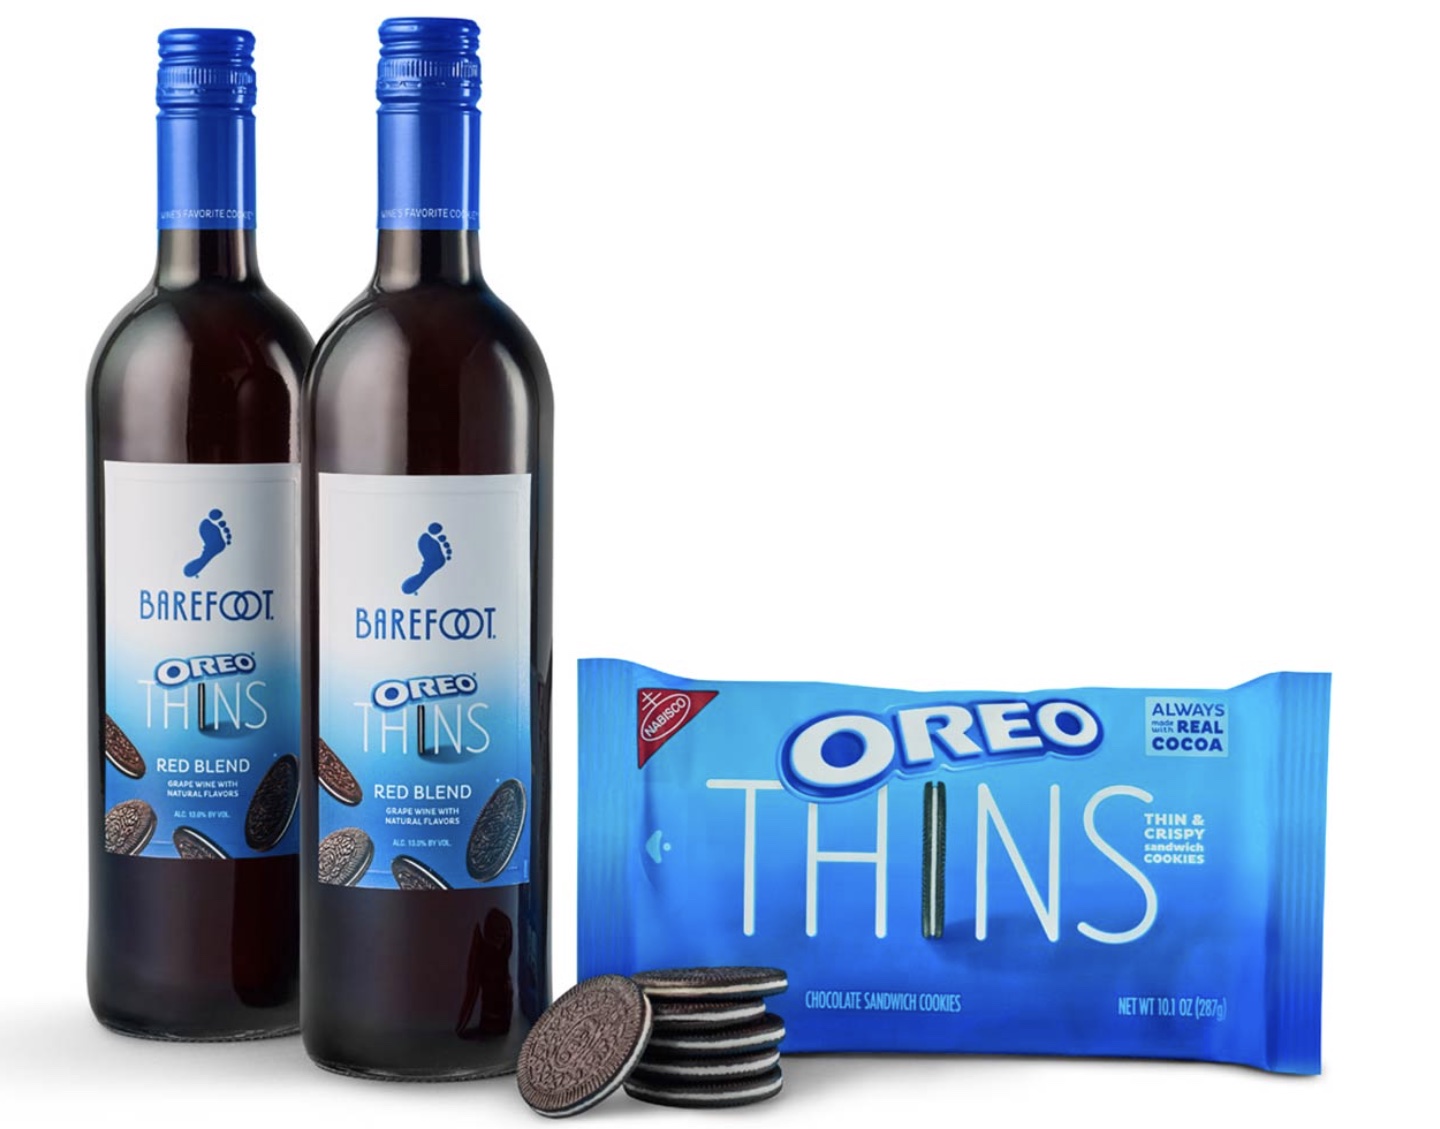 Worst Oreo Collabs - oreo barefoot wine - Unes Favorite Co Barefoot Oreo Thins Red Blend Grape Wine With Natural Flavors All Sin Sy Vol 45 30 Ne'S Favorite Co Barefoot Oreo Thins Red Blend Grape Wine With Natural Flavors Alc 13.3% By Vol Nabisco Always Re